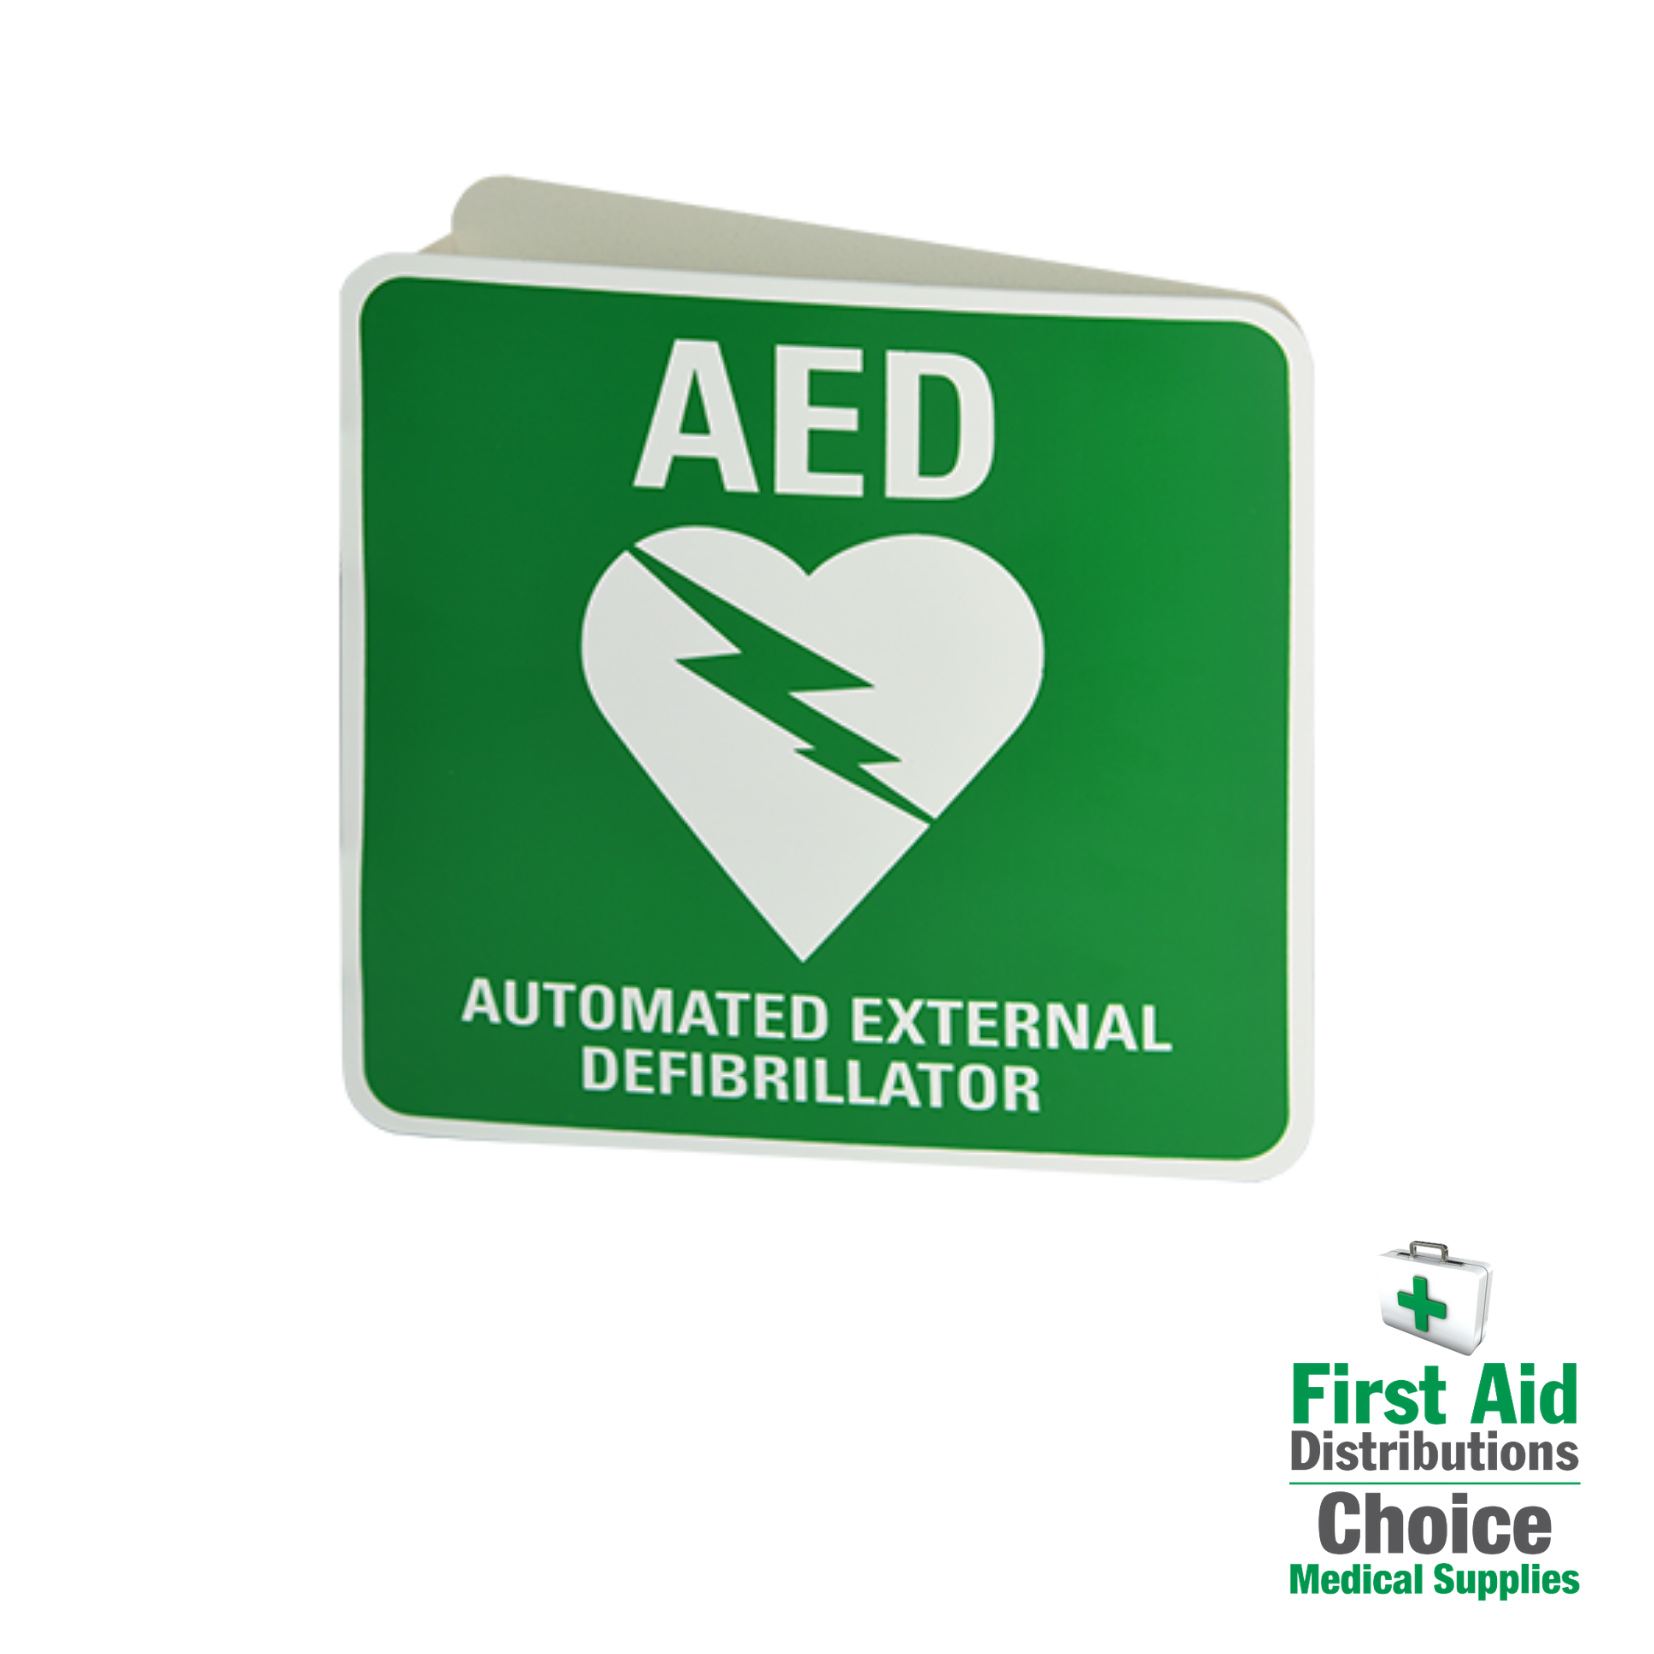 collections/AED_Wall_Angle_Sign_First_Aid_Distributions.png